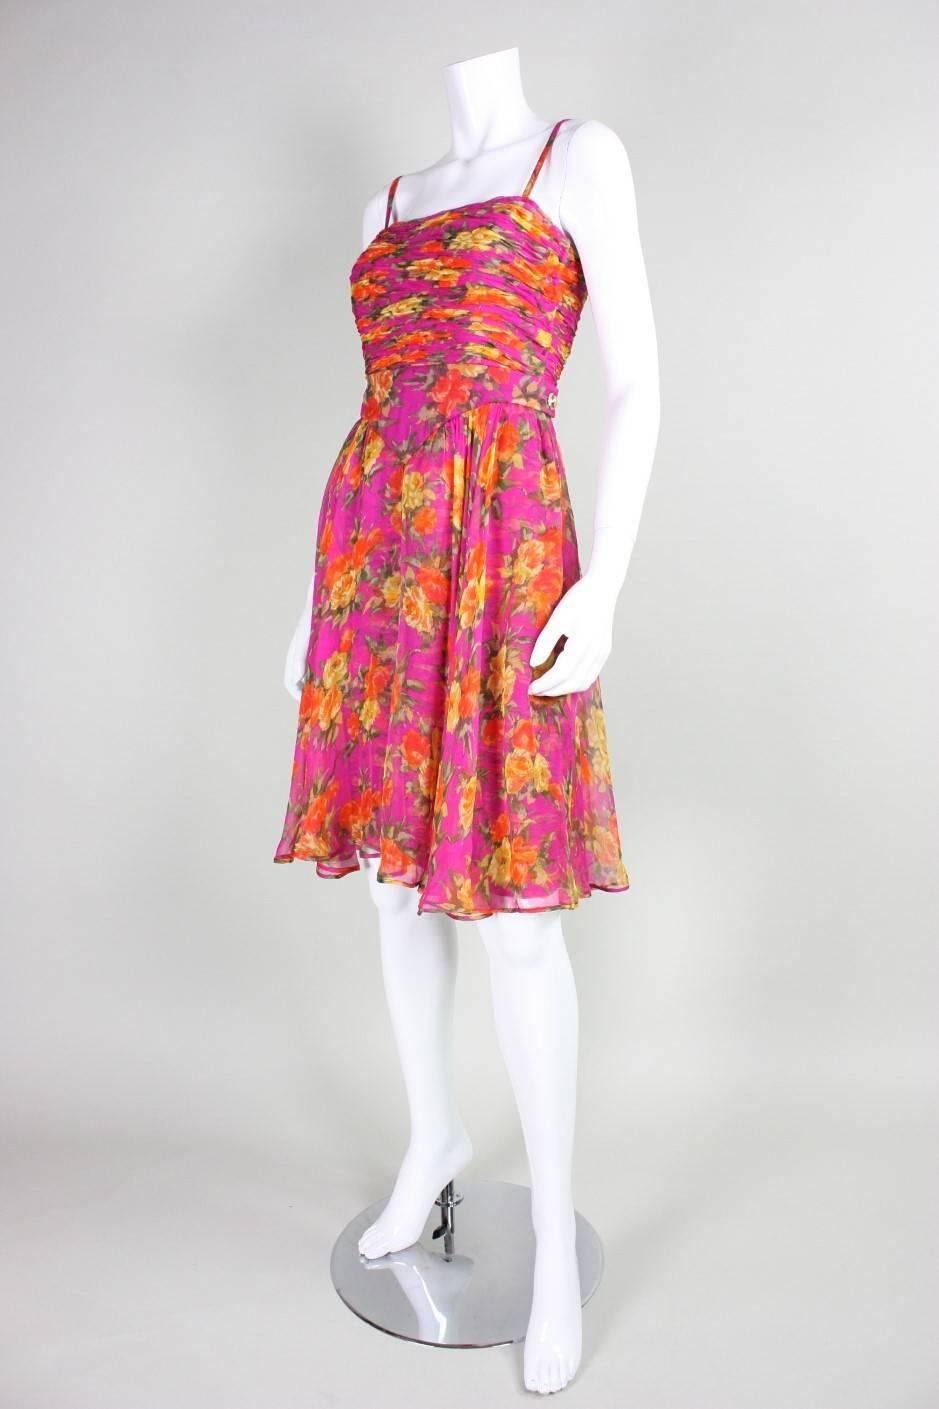 Vintage dress from Valentino dates to the 1990's and is made of a floral-printed silk chiffon that is ruched throughout.  Overskirt is gathered all along fitted waistband with an opening at the center front.  Squared neckline.  Gold-toned rhinestone